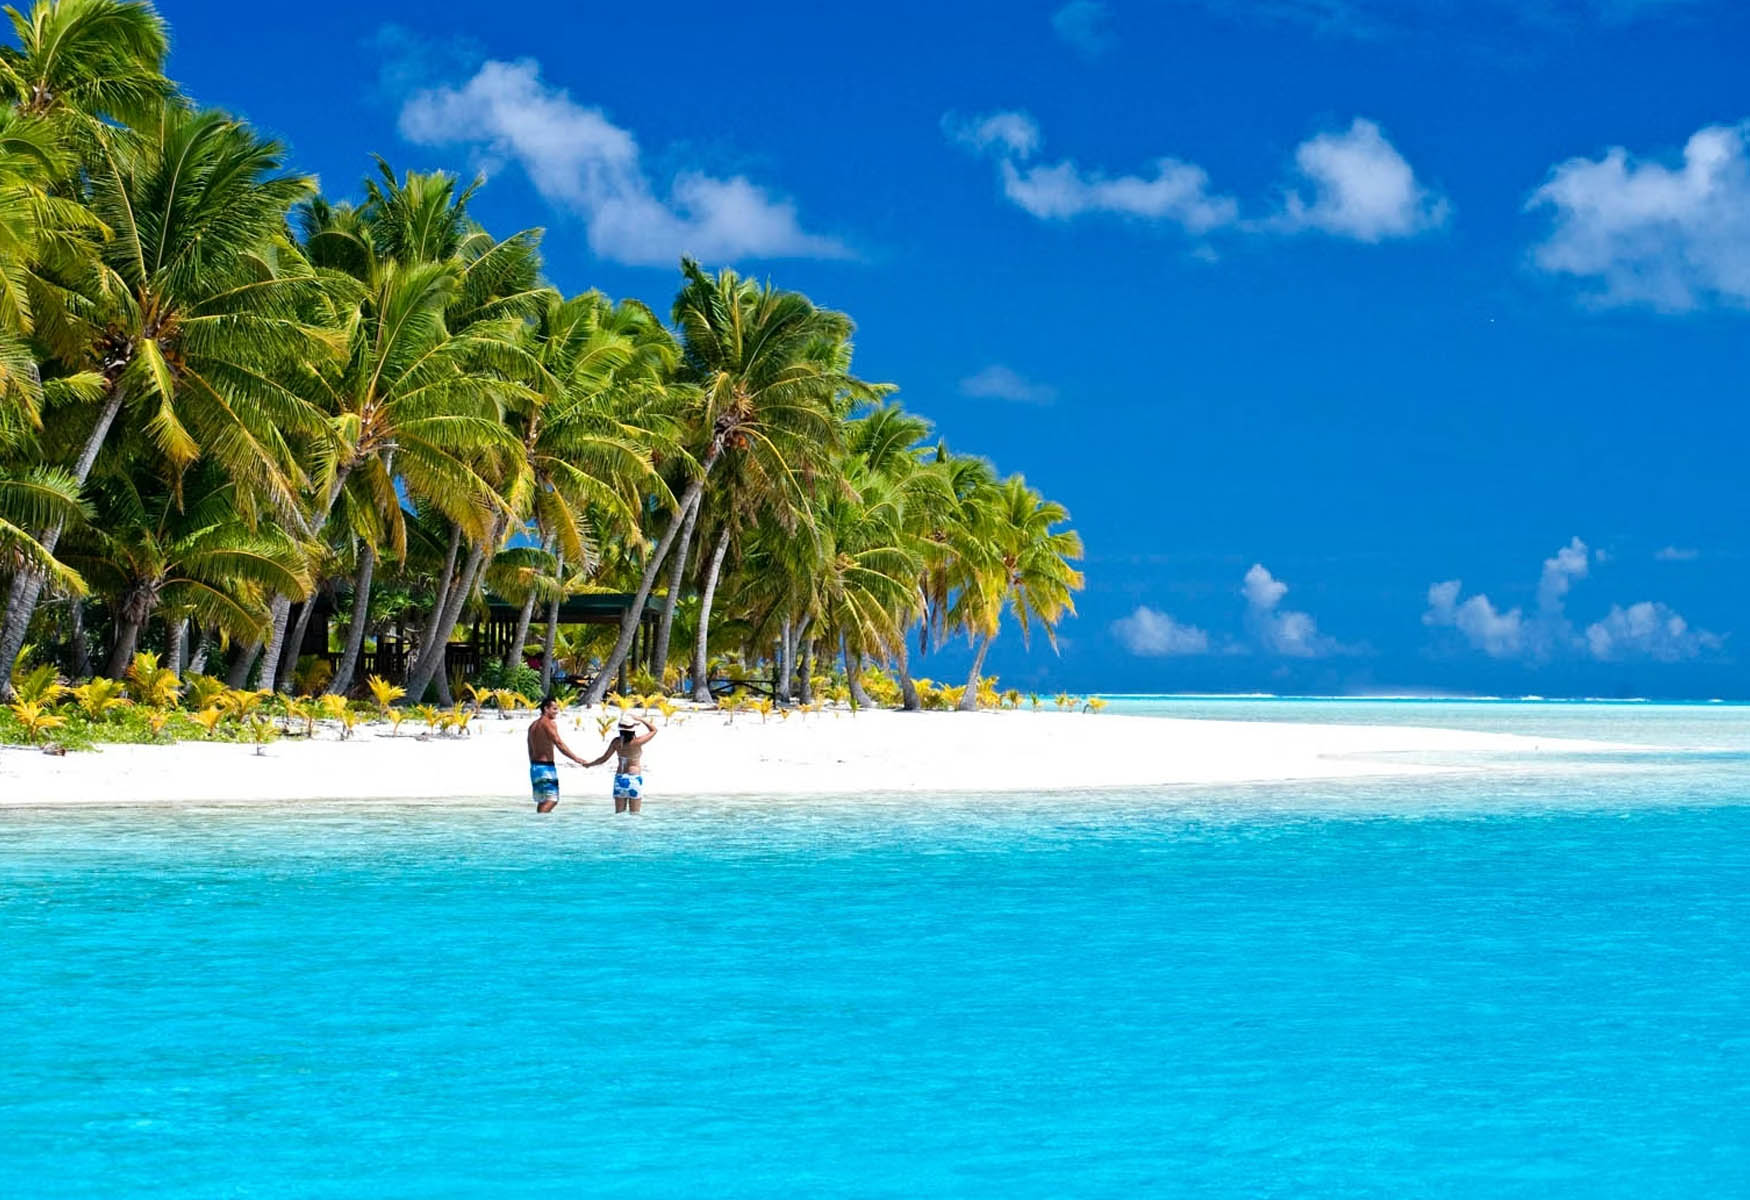 Where To Stay In Cook Islands: The BEST Areas